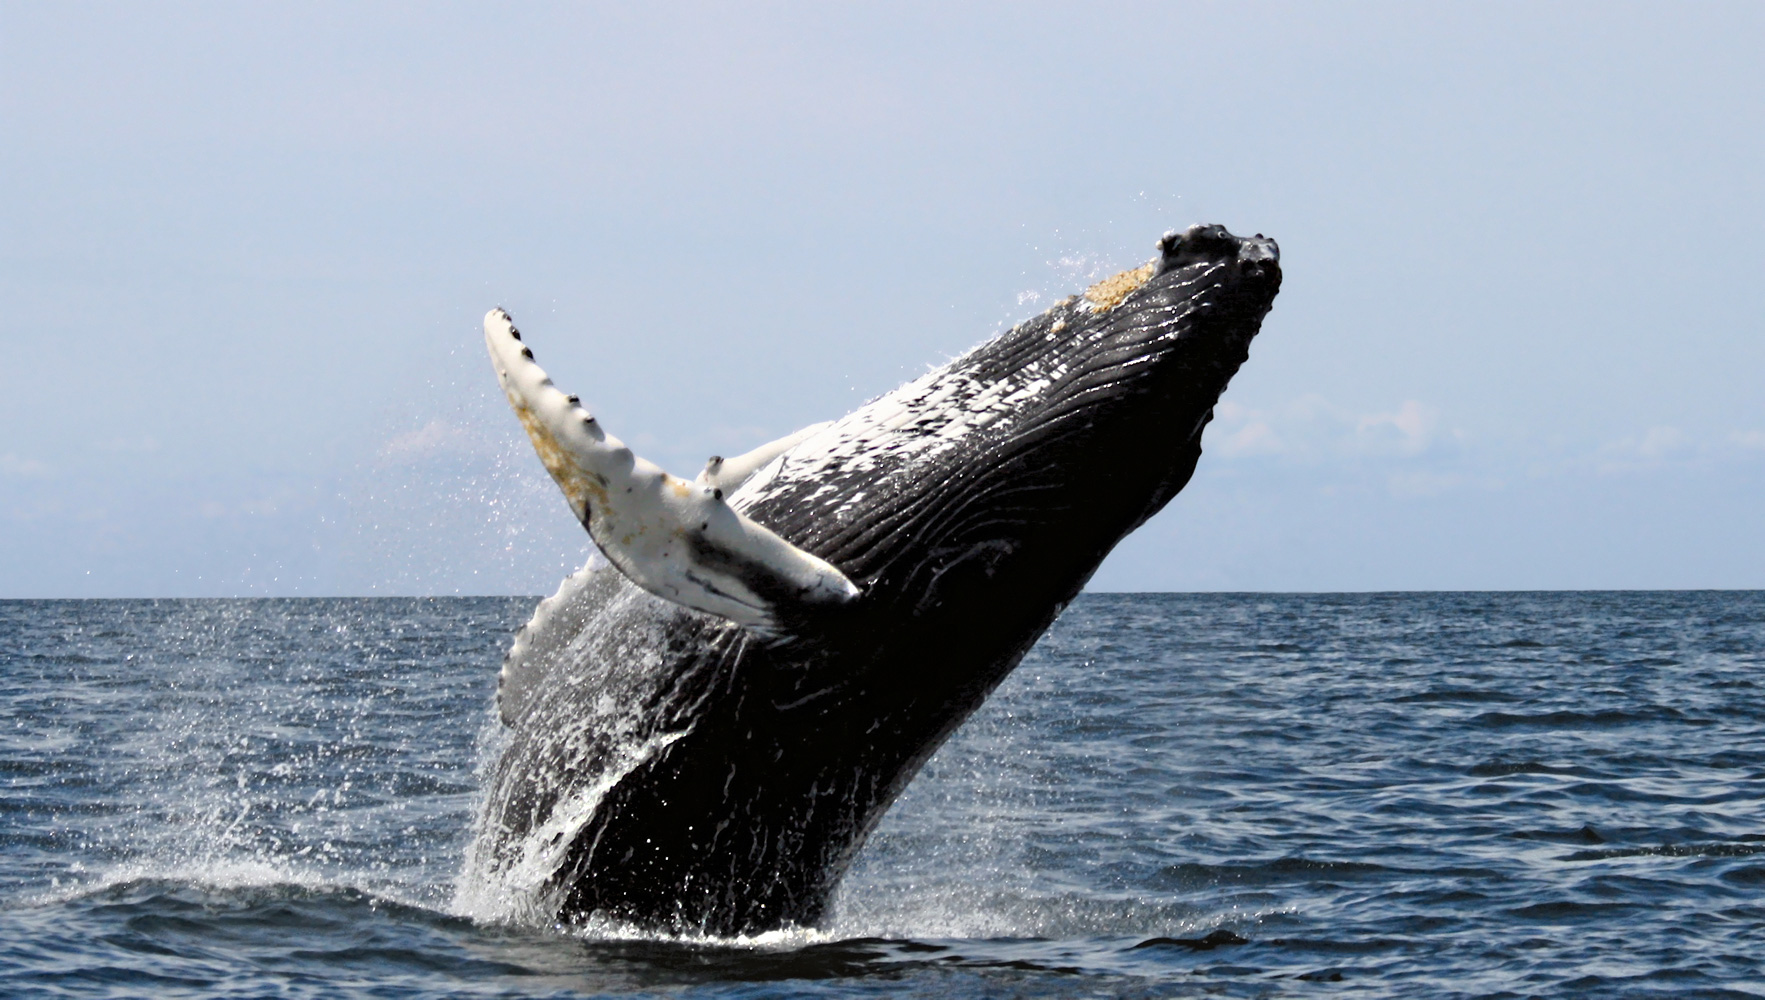 The International Whaling Commission decides to end commercial whaling by 1985-86